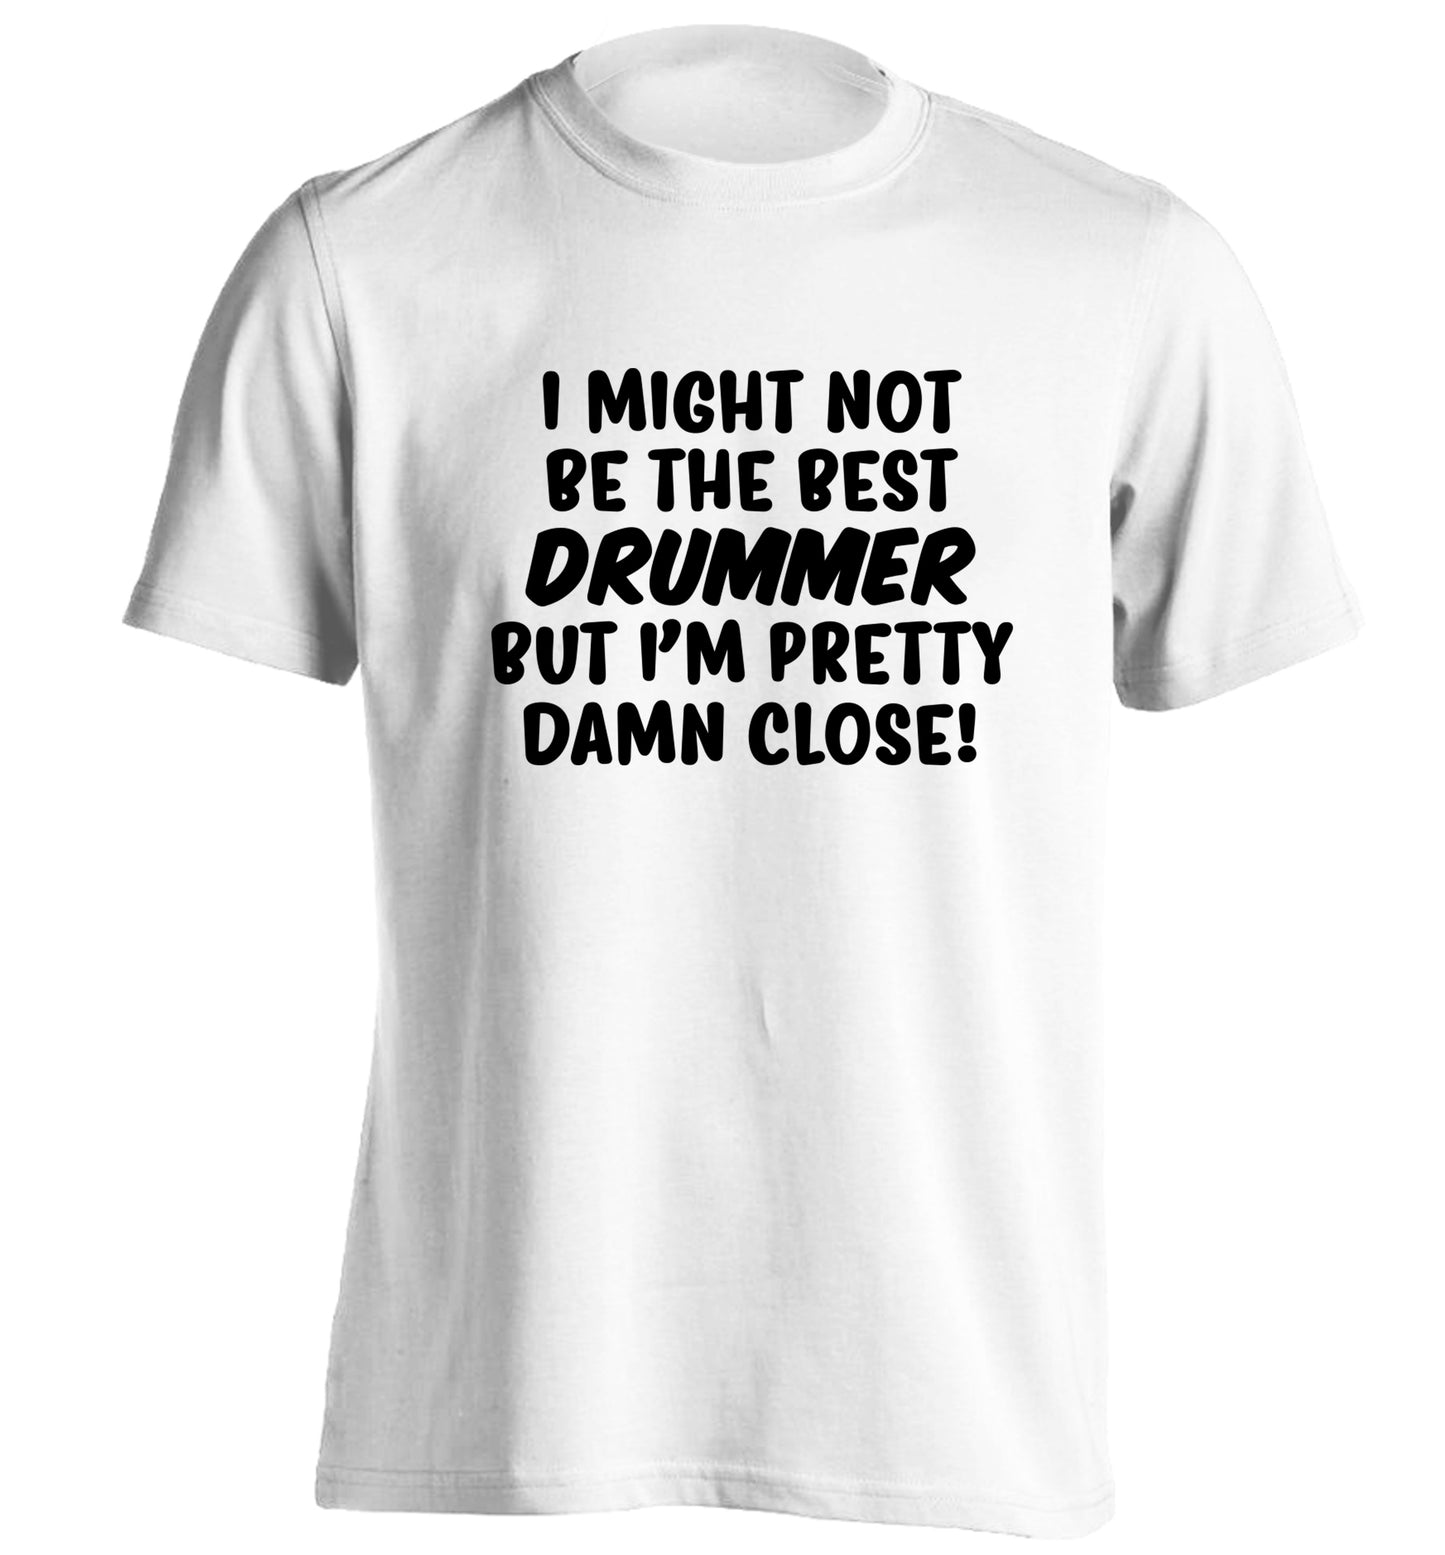 I might not be the best drummer but I'm pretty close! adults unisexwhite Tshirt 2XL